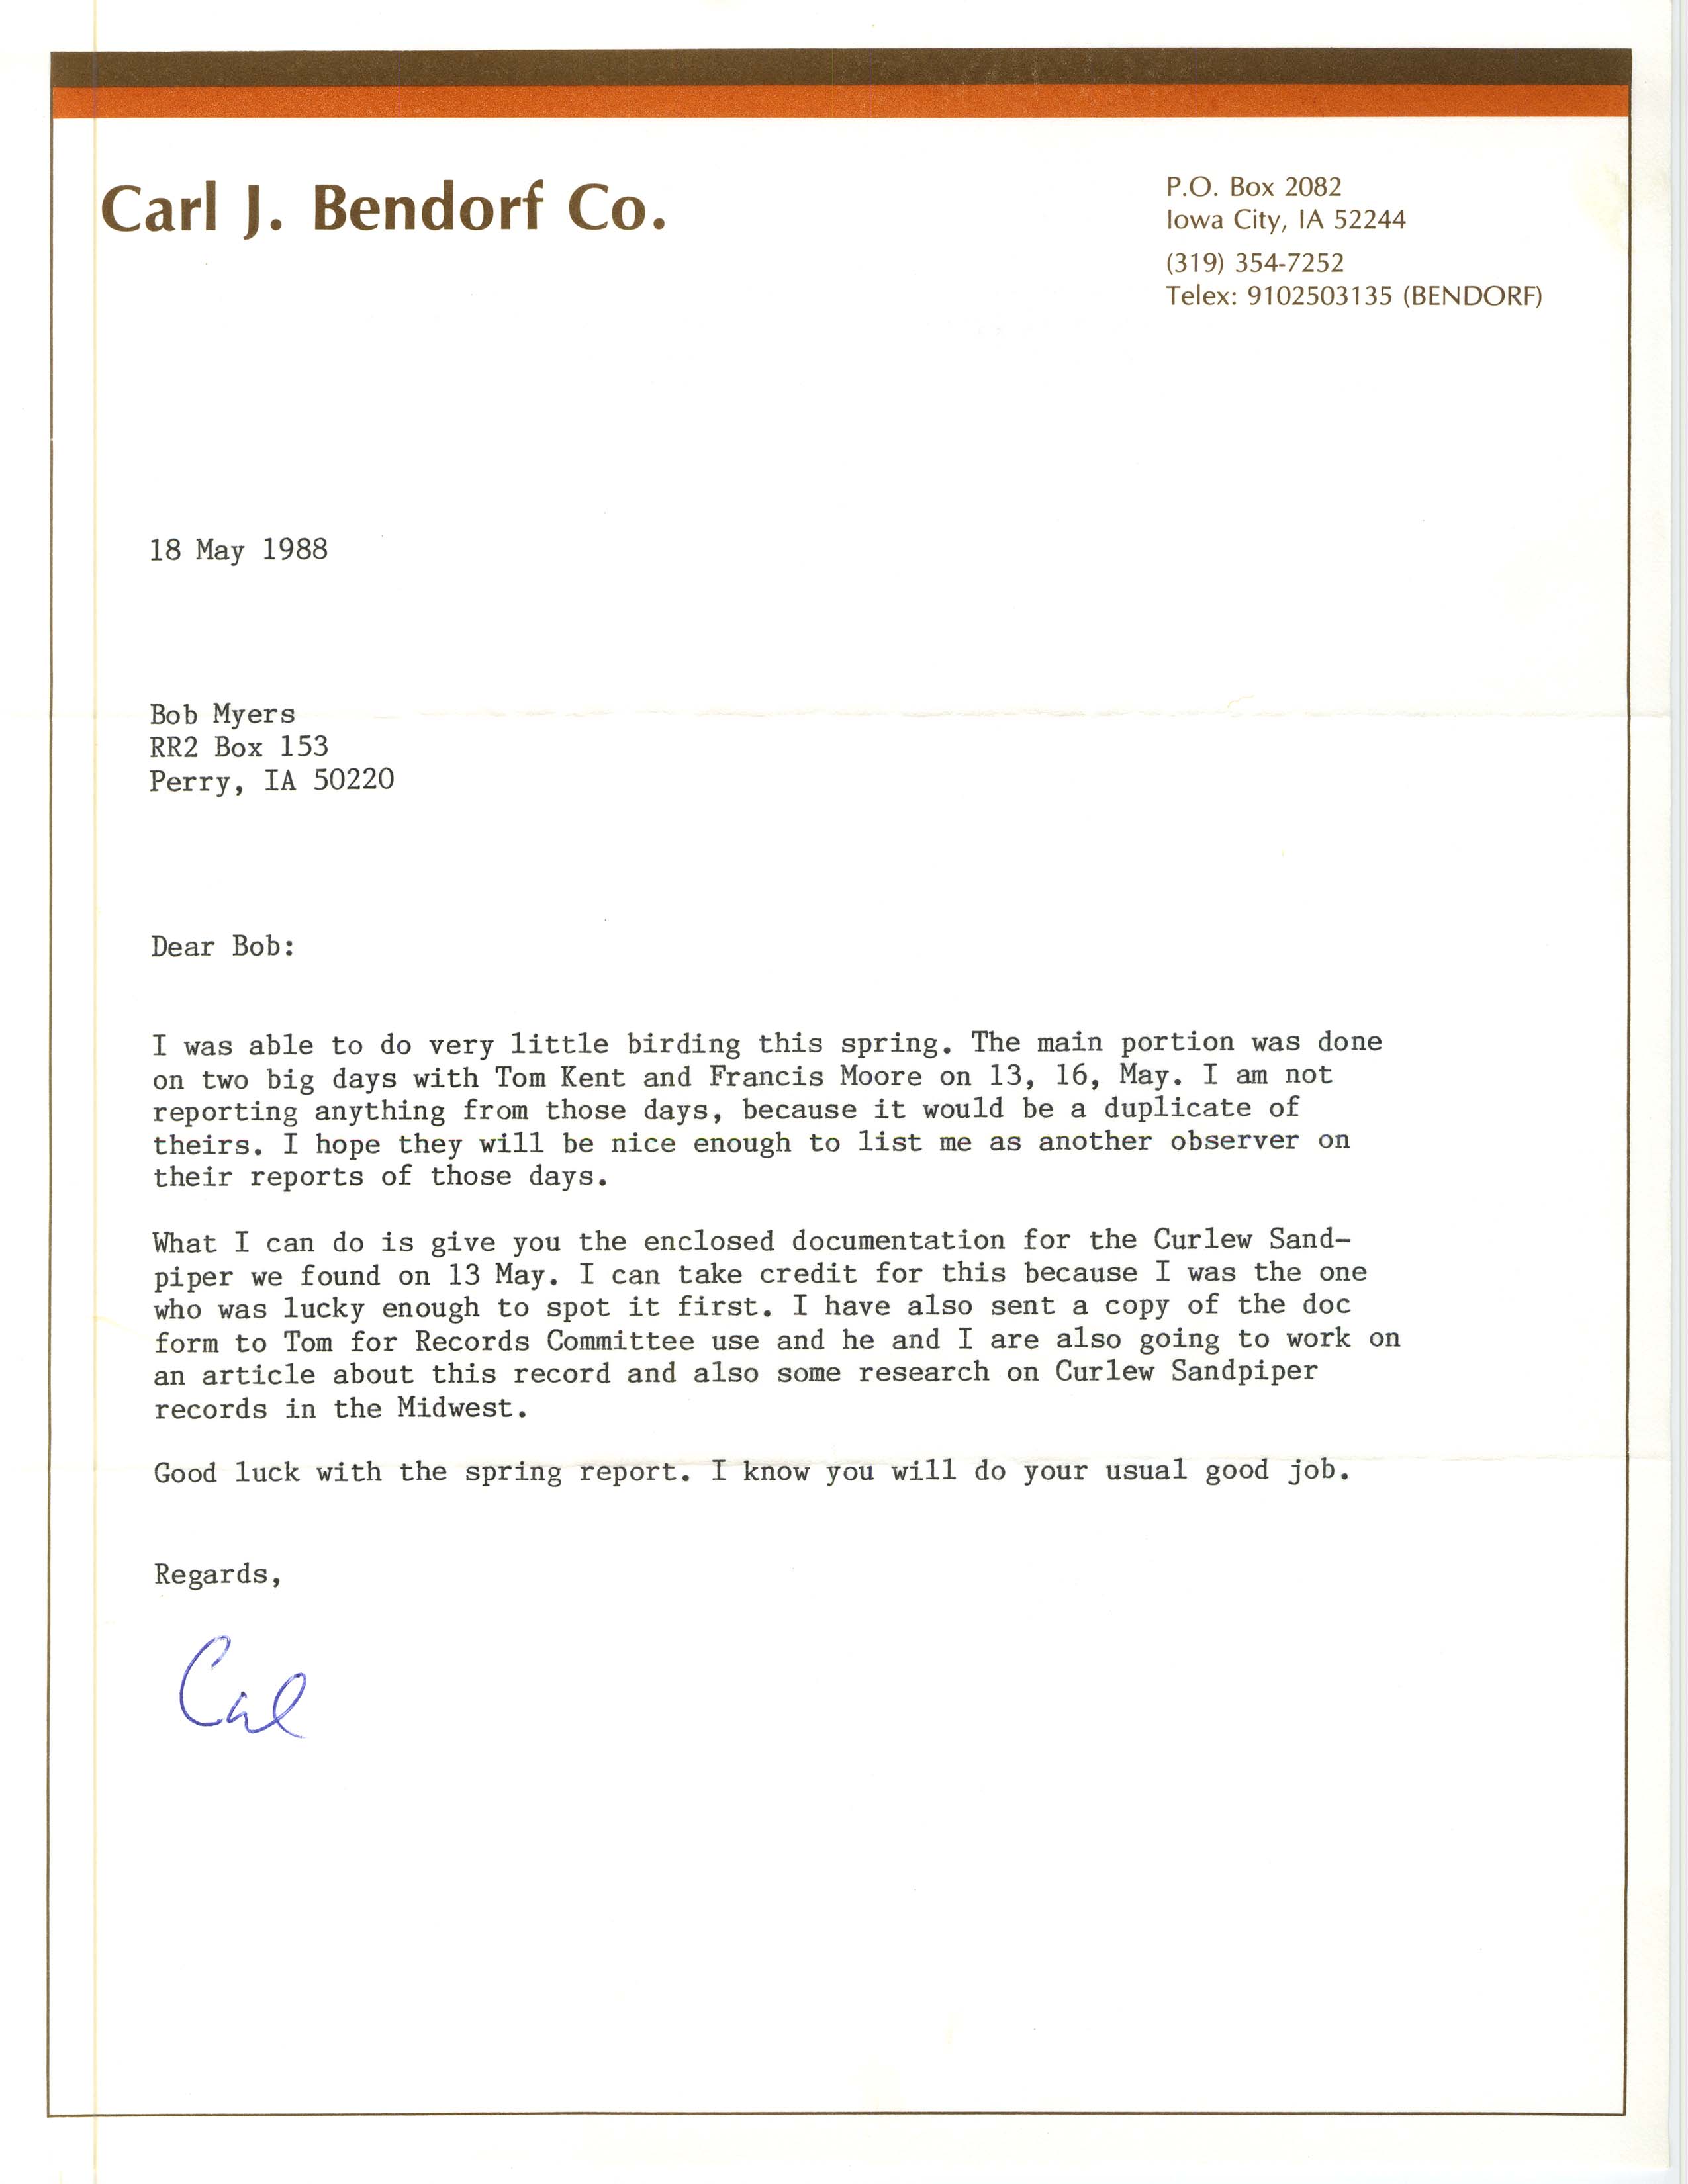 Carl J. Bendorf letter to Robert K. Myers regarding his sighting of a Curlew Sandpiper, May 18, 1988